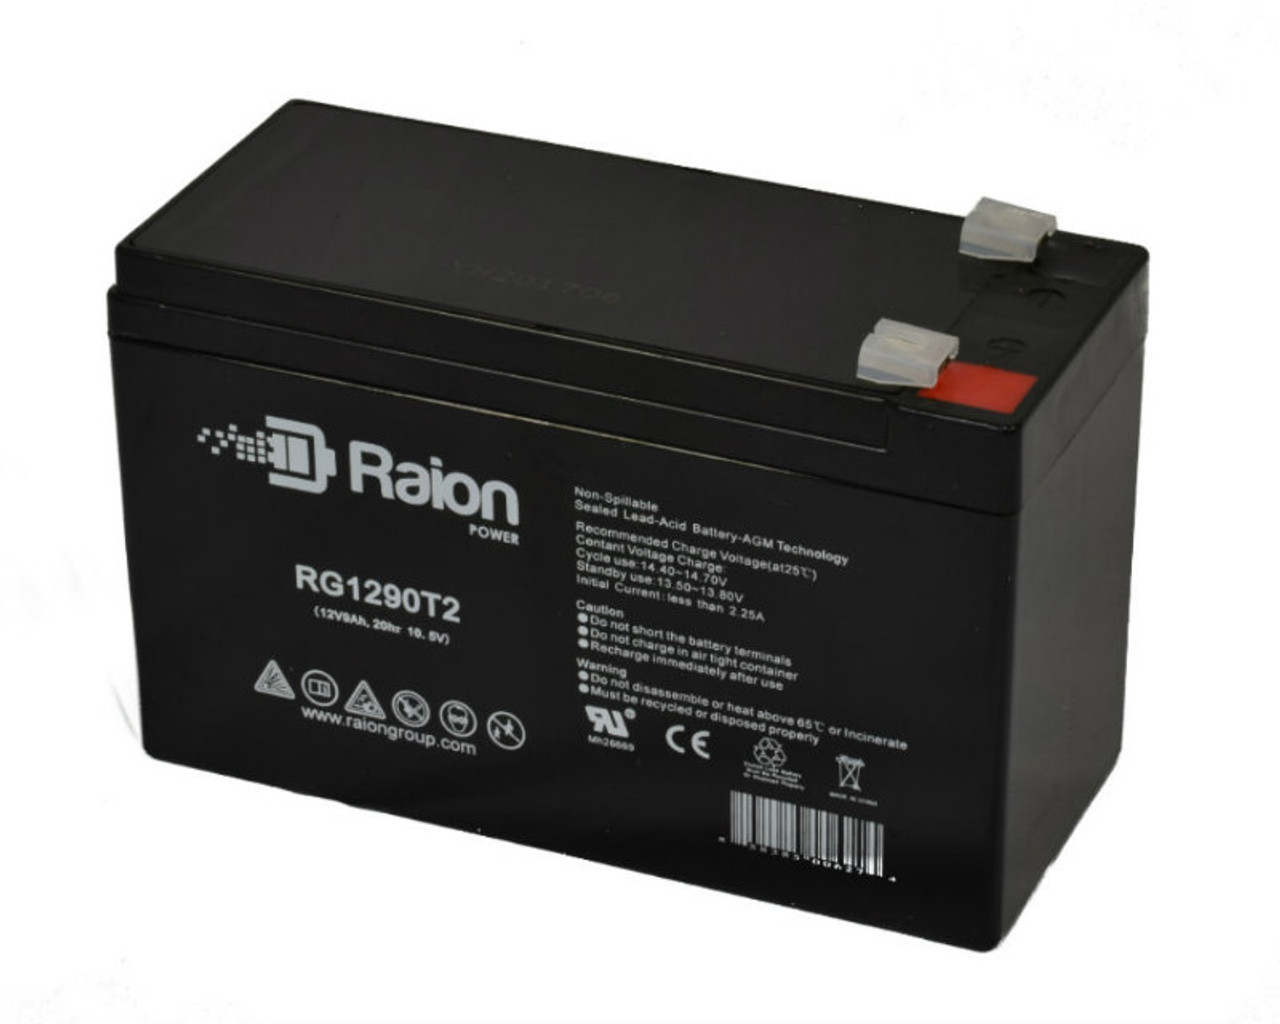 Raion Power Replacement 12V 9Ah Battery for Helios FB12-9-F2 - 1 Pack